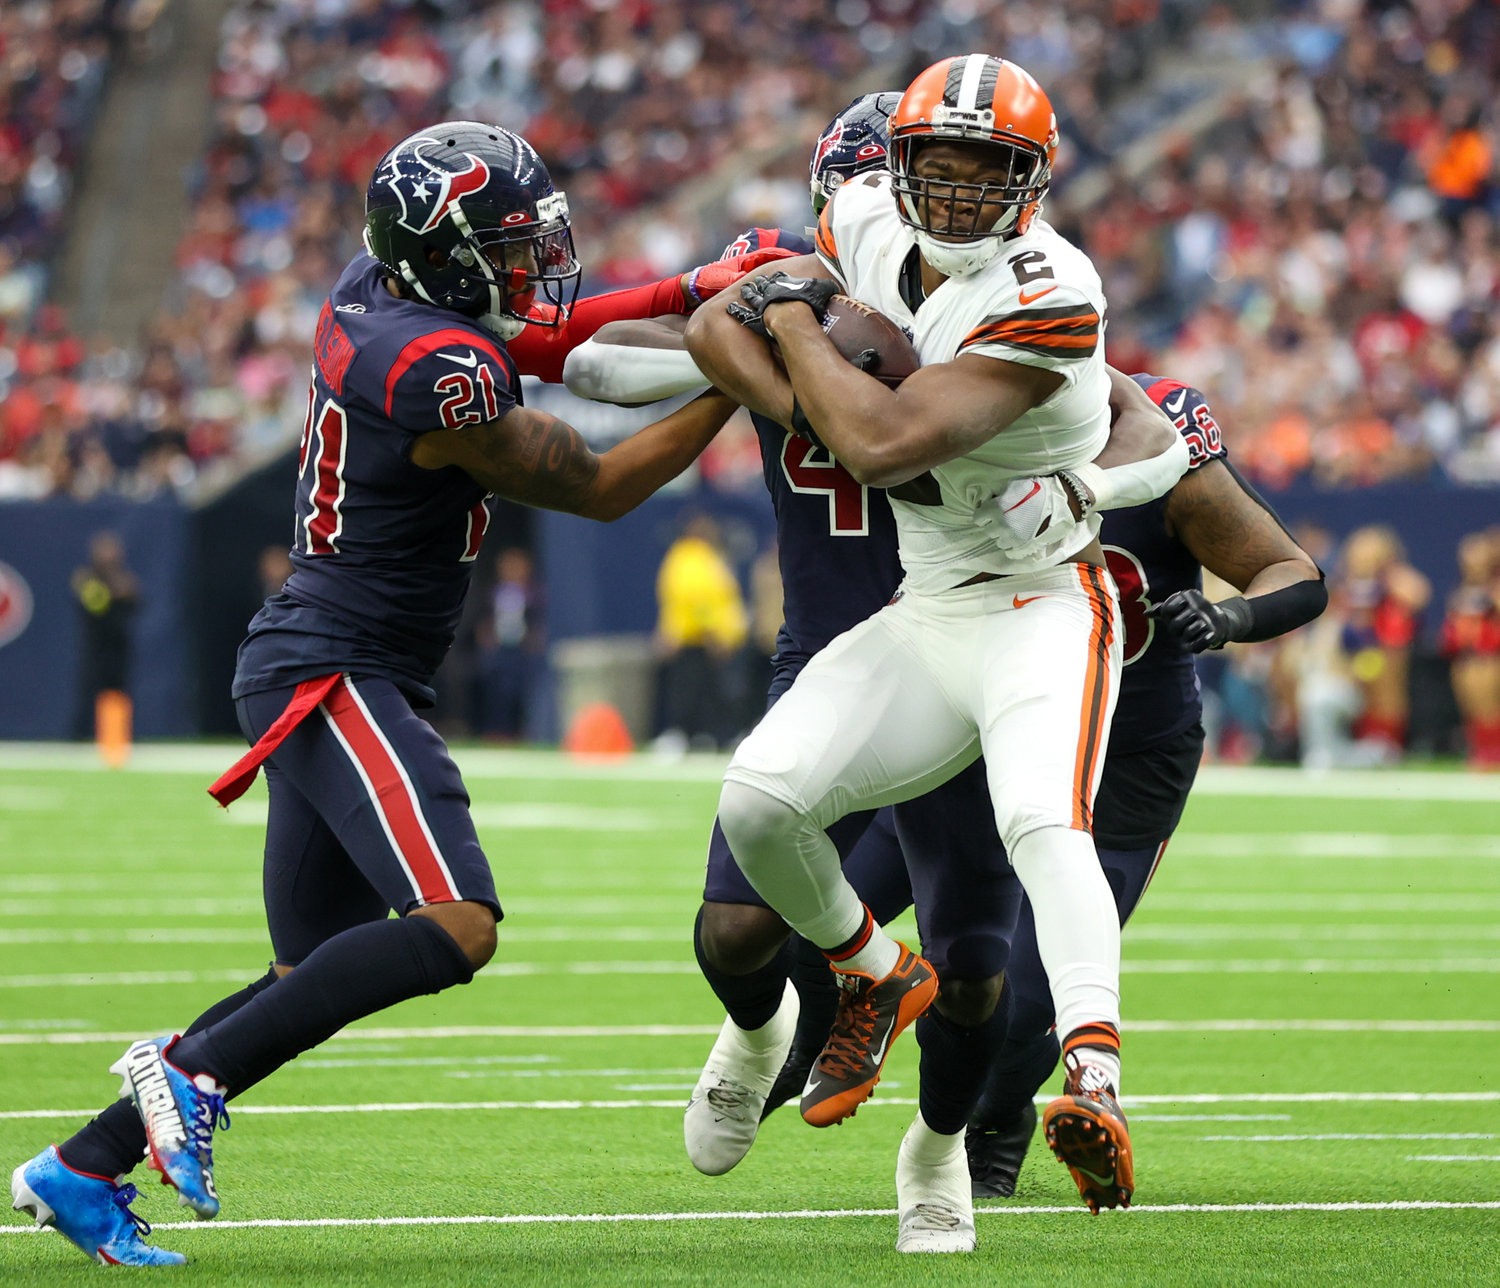 Cleveland Browns wide receiver Amari Cooper (2) is tackled after a catch during an NFL game between the Houston Texans and the Cleveland Browns on Dec. 4, 2022, in Houston. The Browns won, 27-14.